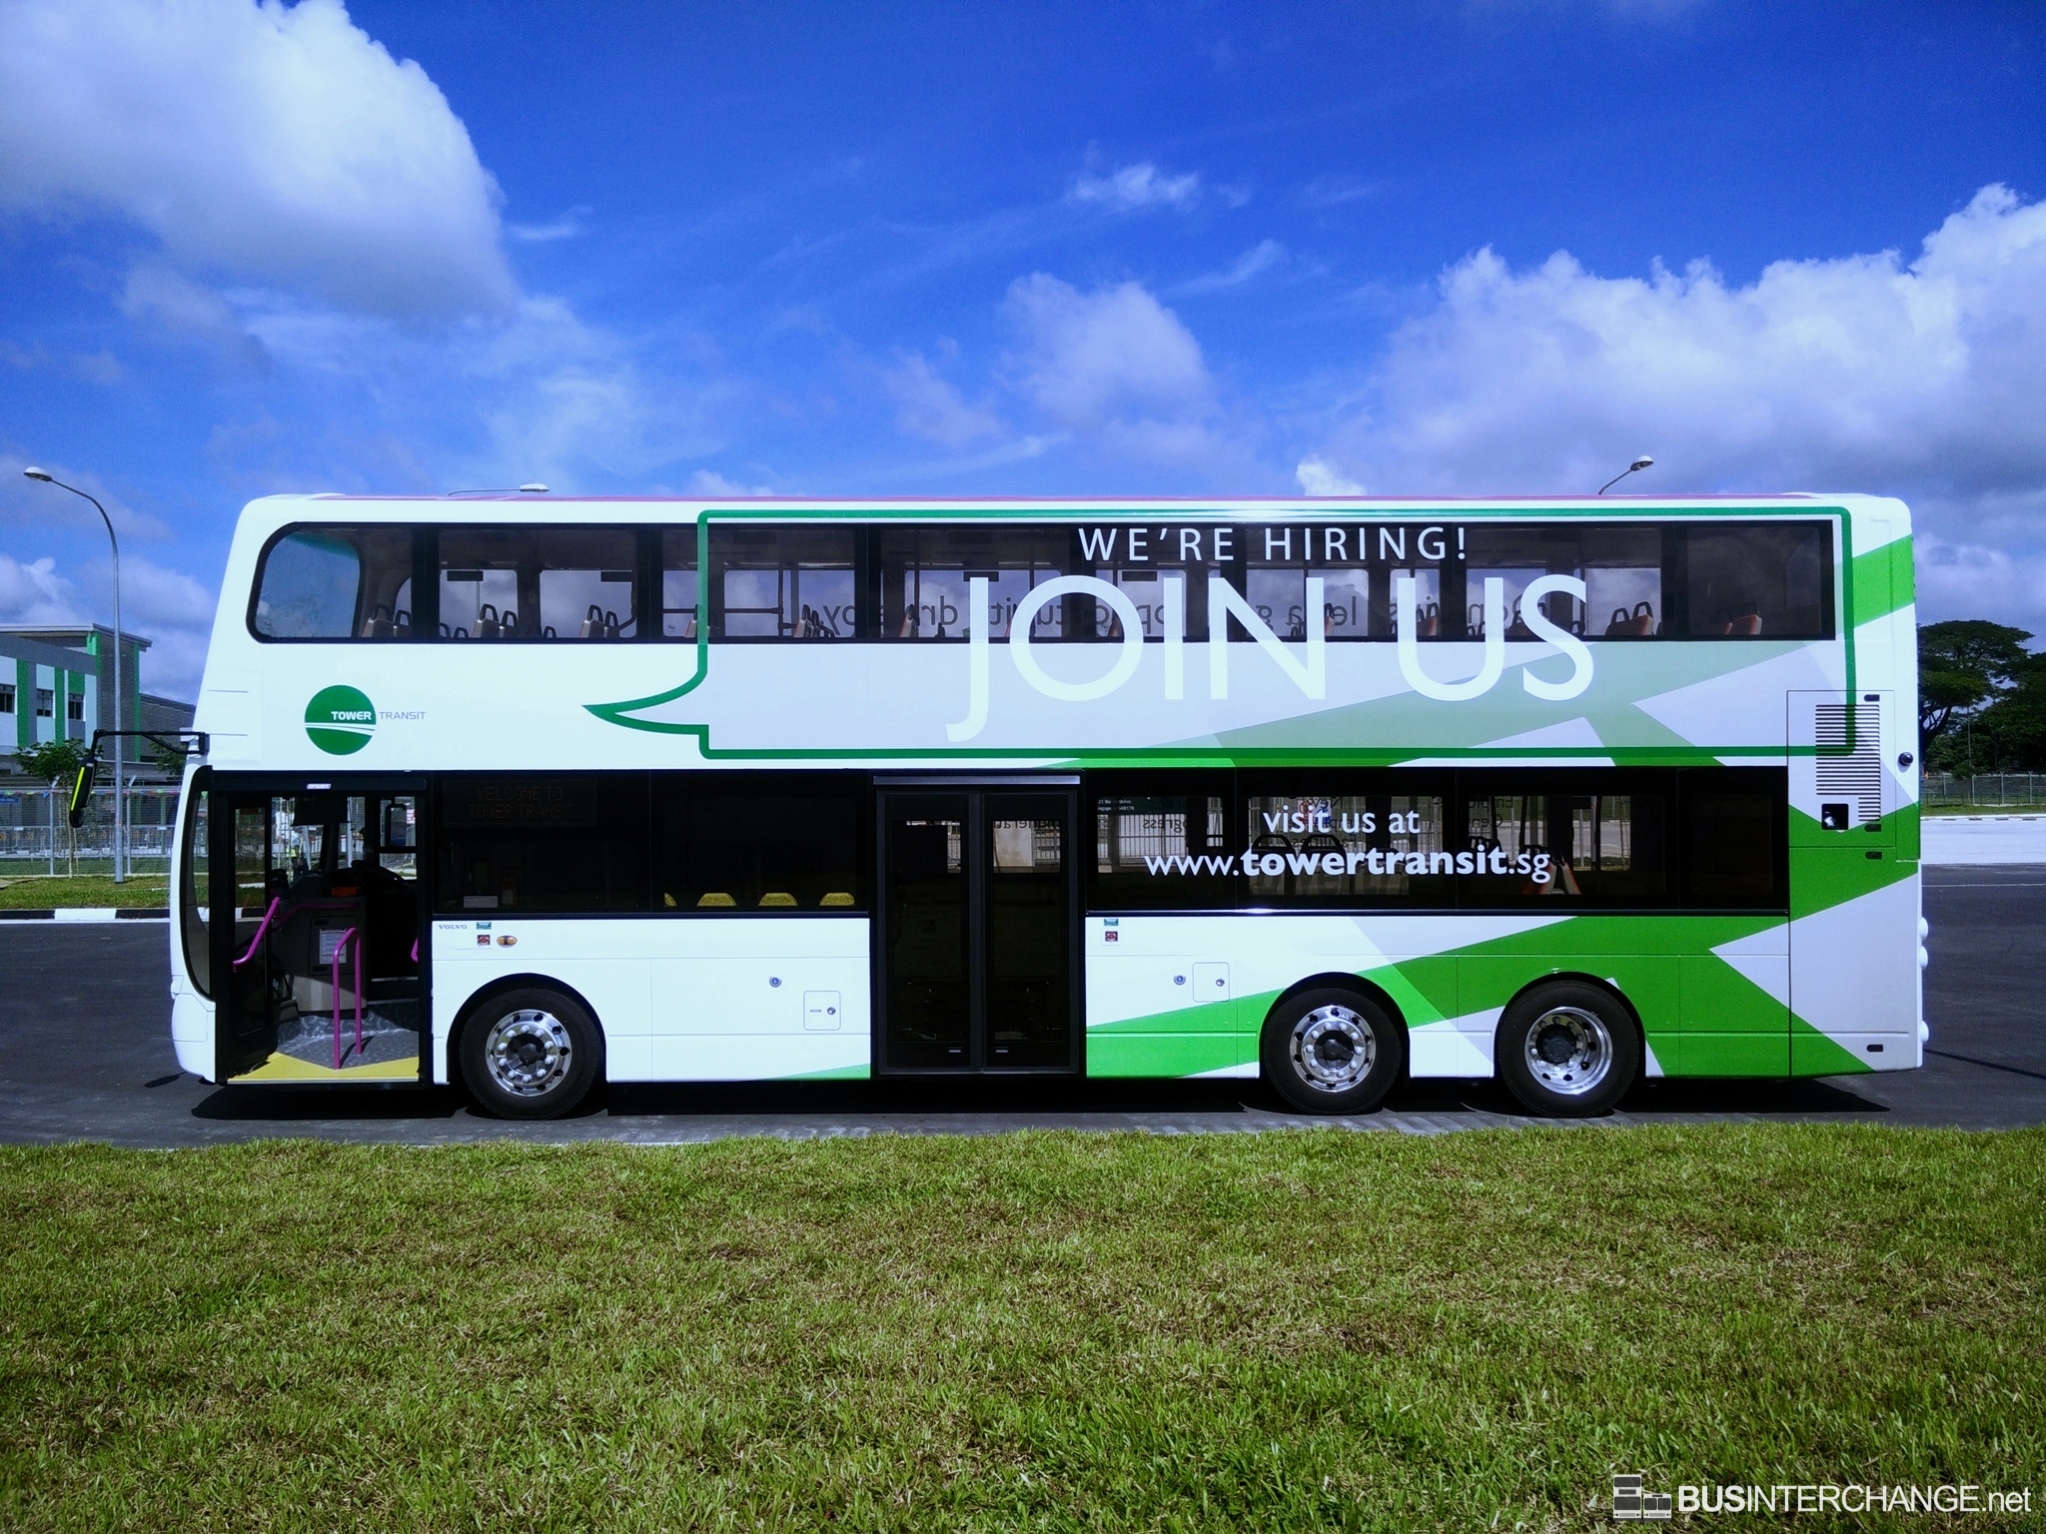 Volvo B9TL (SG5006P (Tower Transit Singapore) - A Bulim Carnival Day Shuttle)